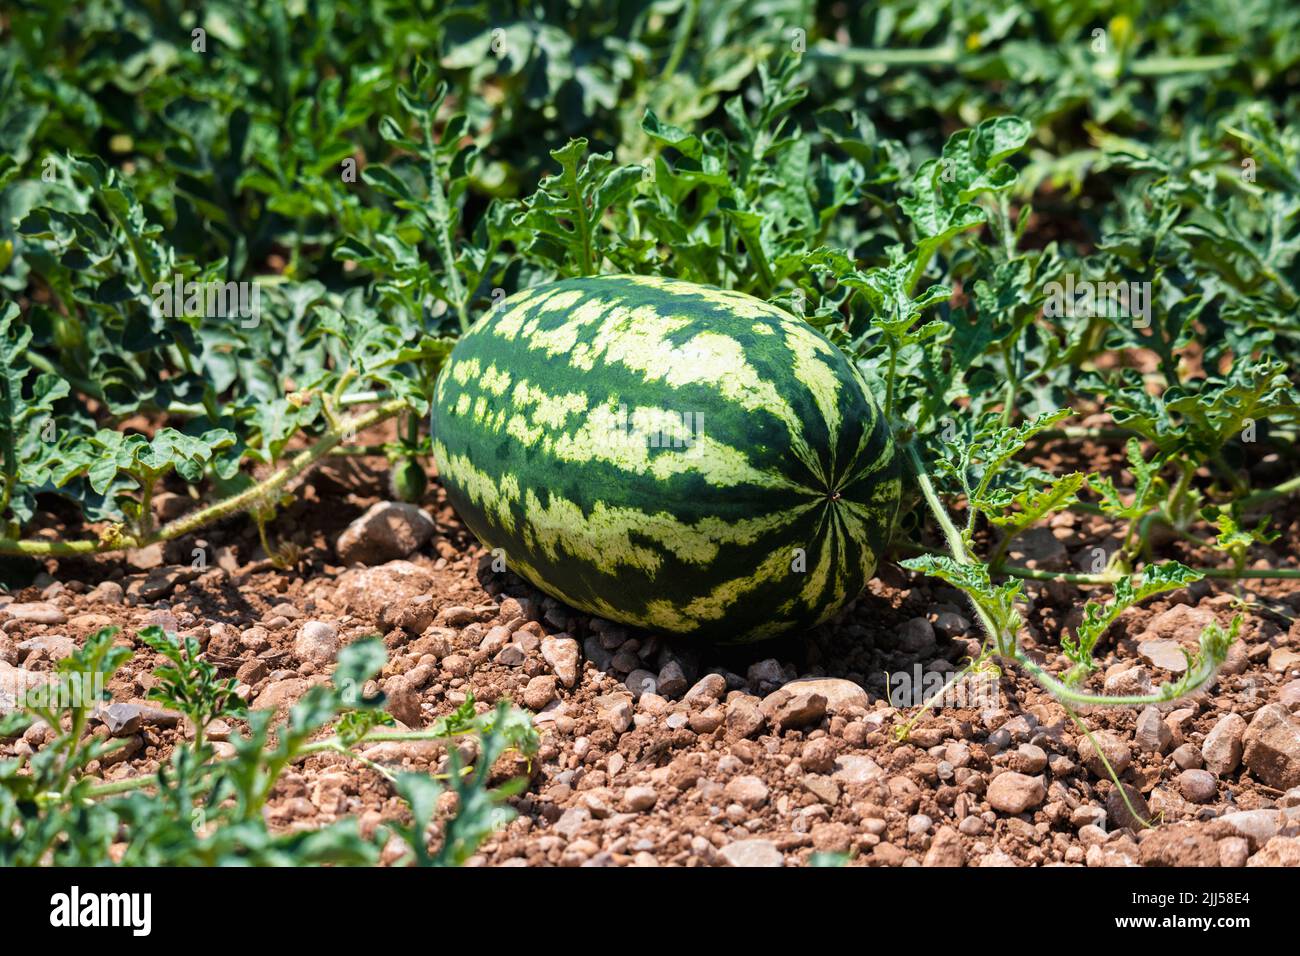 Close up of a large watermelon under the sun Stock Photo